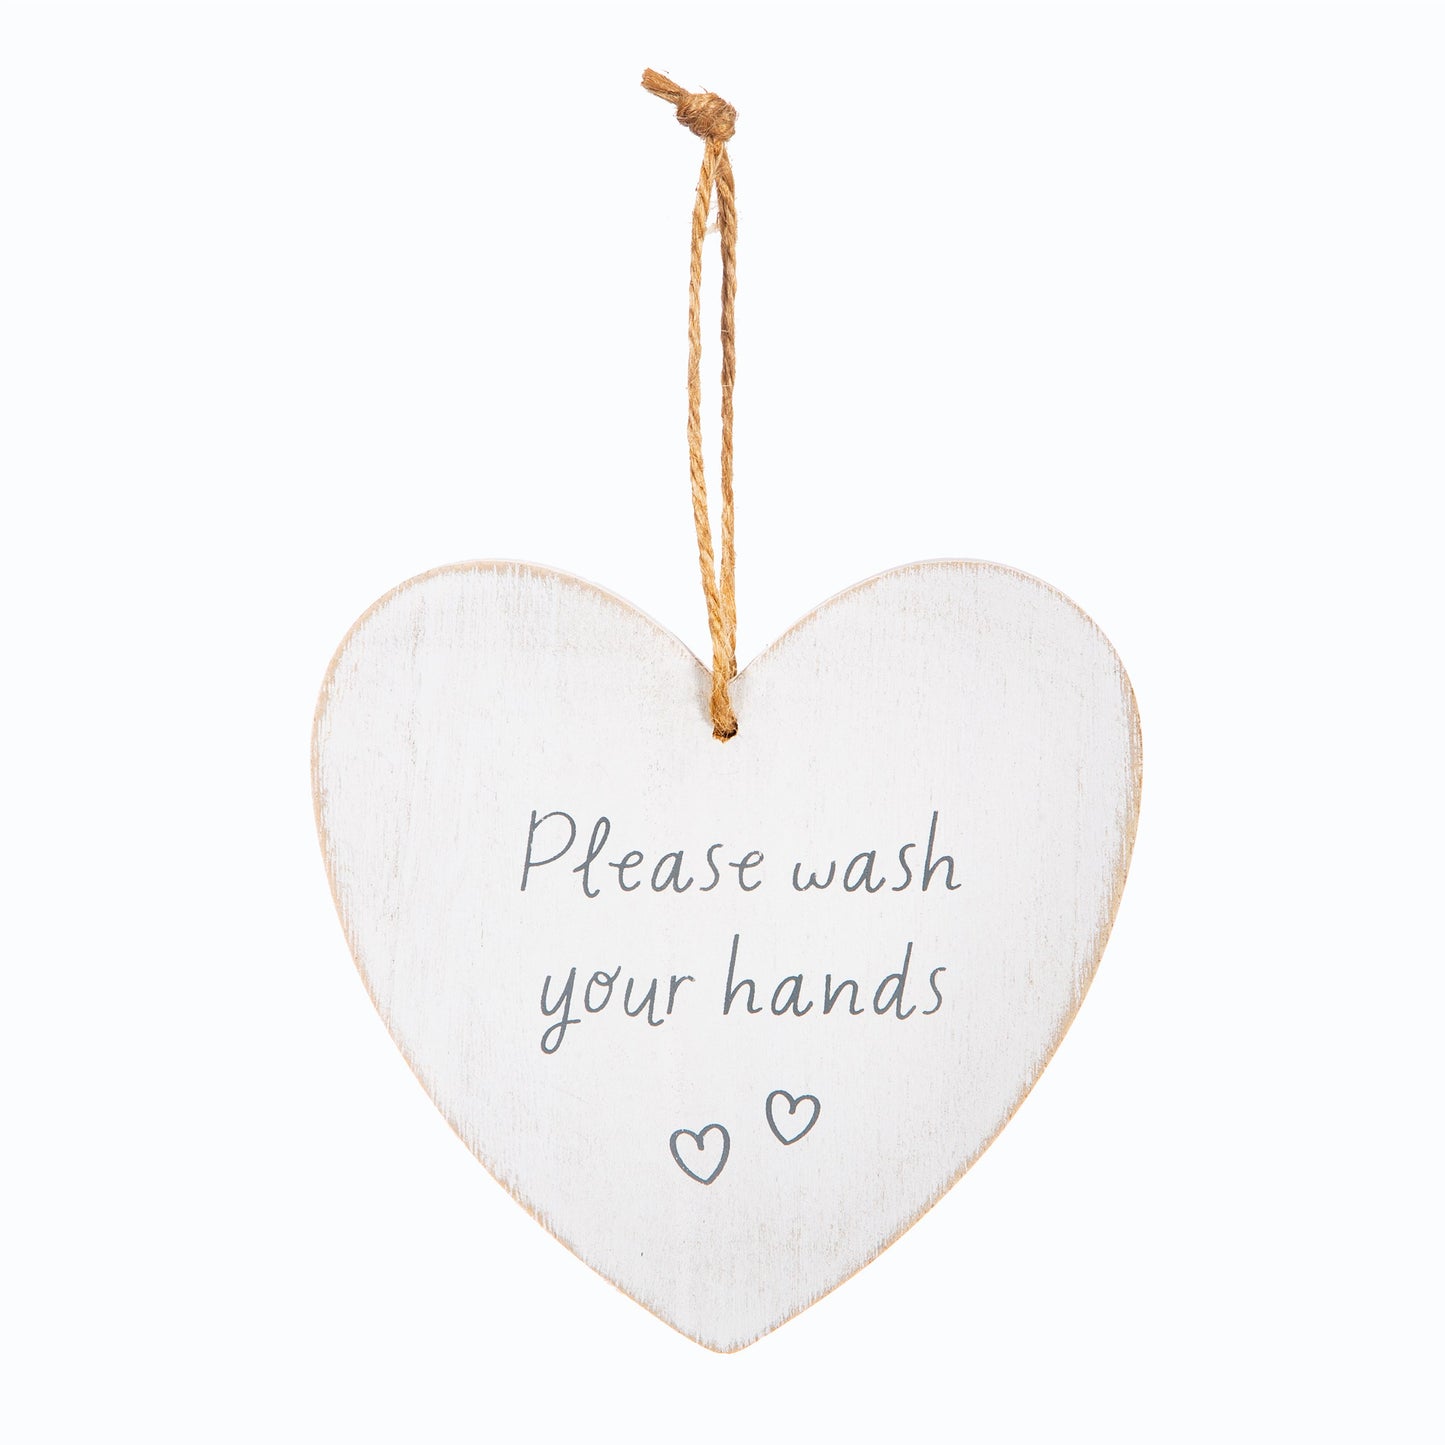 Sass and Belle bathroom hanging heart decor